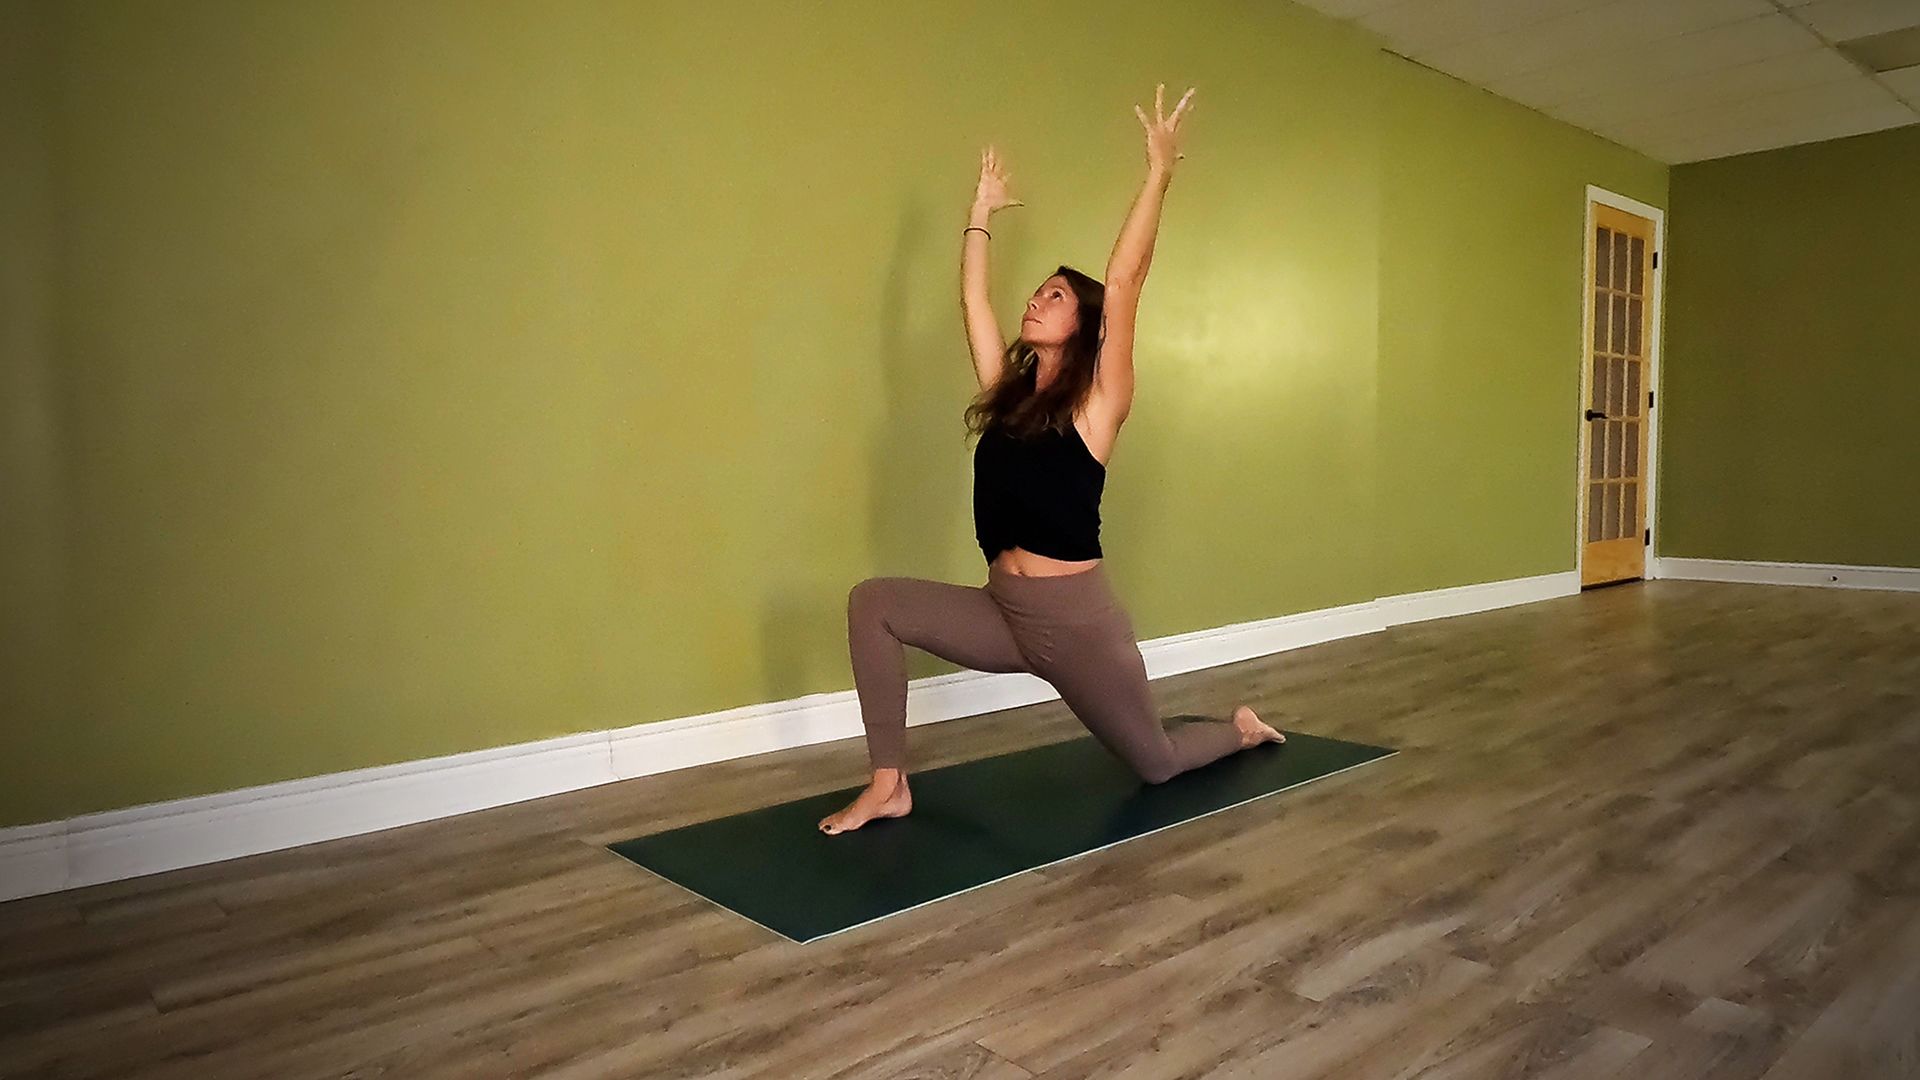 Chair yoga flow is a series of yoga poses that are adapted to be done while  sitting on a chair. Chair yoga is a gentle form of yoga that is ideal  for